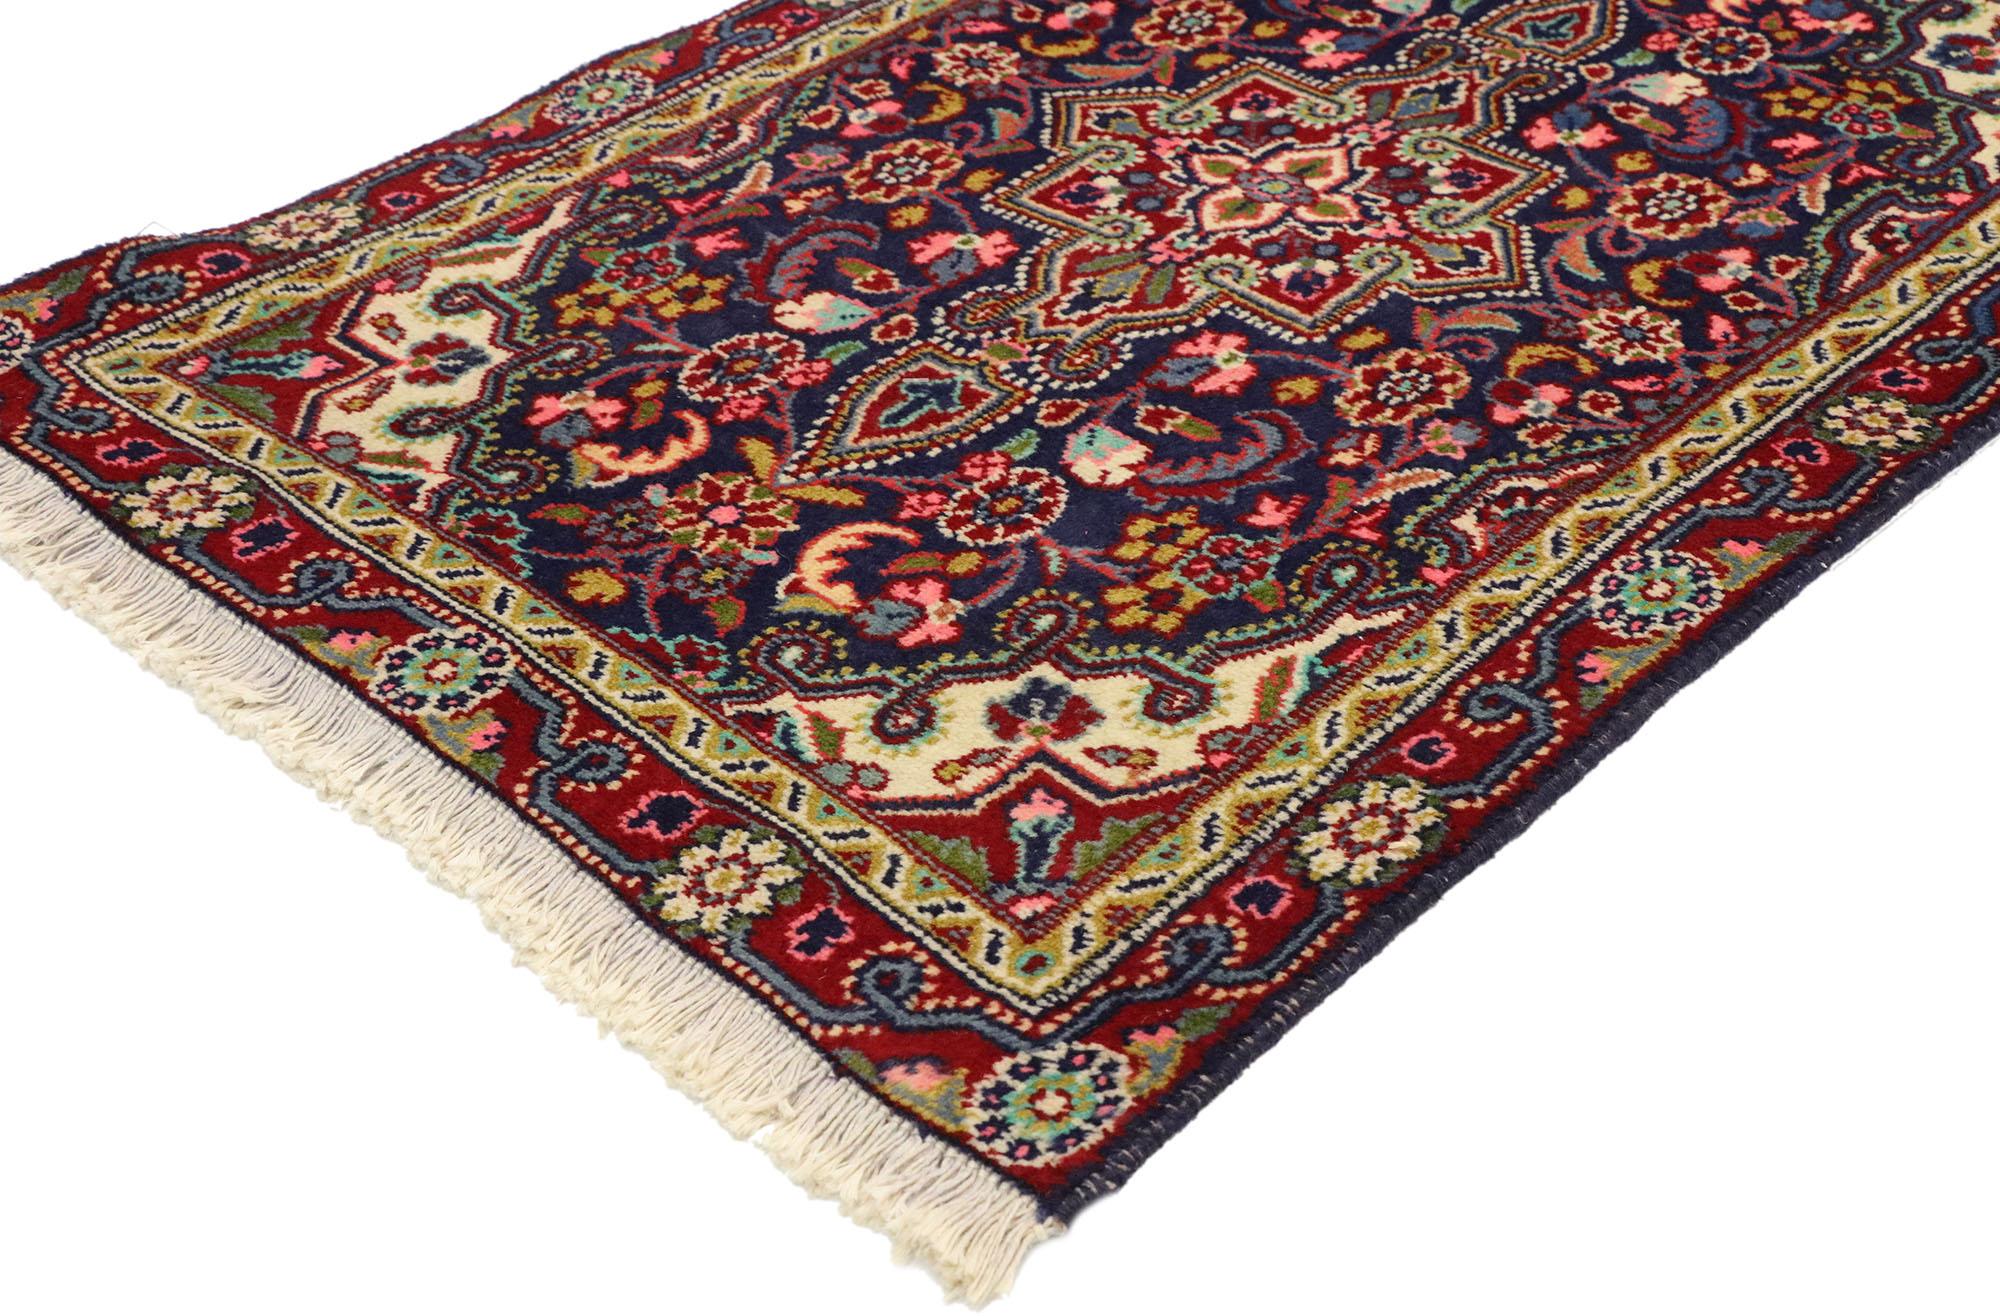 76218, vintage Persian Hamadan Accent rug, small Persian rug. This vibrant Persian Hamadan rug with modern style features a stylized central medallion rendered in hues of hot pink, mint green, royal blue, apricot, ivory and aquamarine floating on a